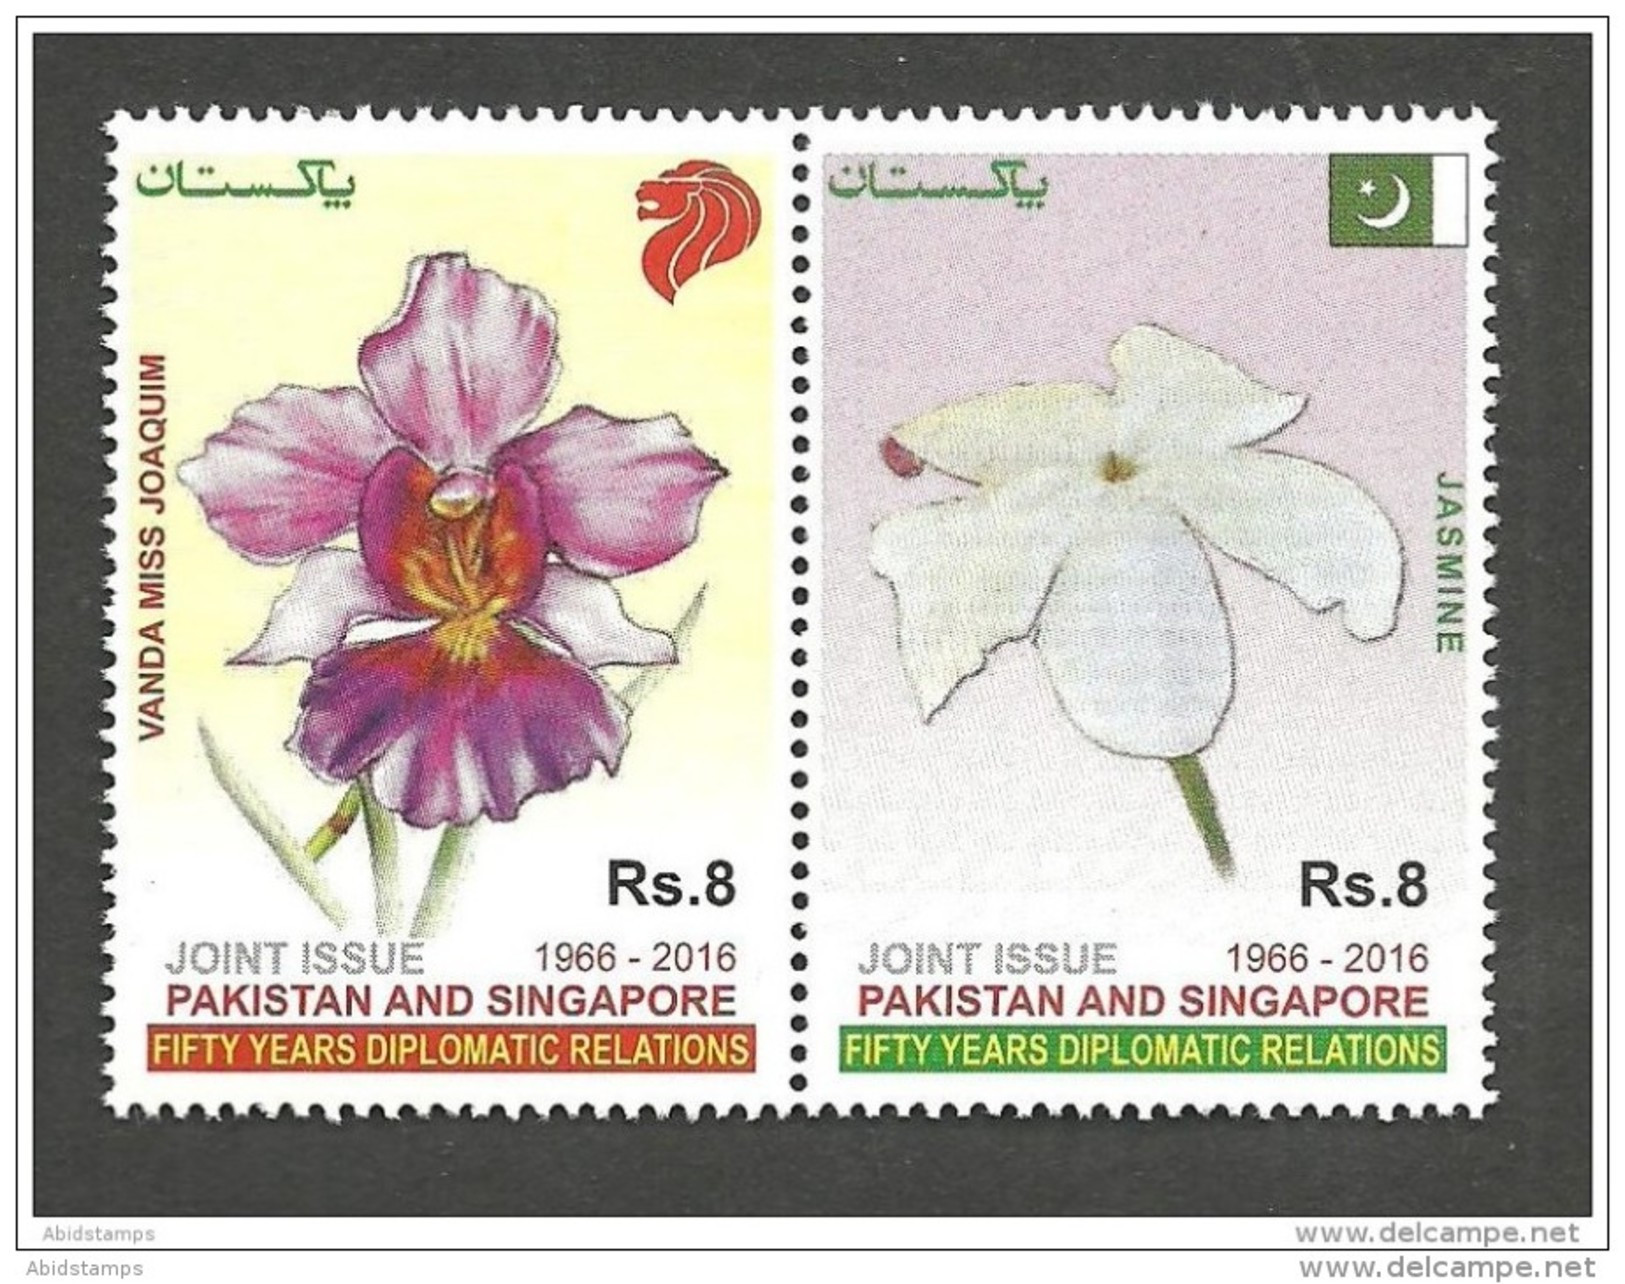 PAKISTAN 2016  JOINT ISSUE 50 YEARS OF DIPLOMATIC RELATIONS PAKISTAN AND SINGAPORE MNH - Pakistan